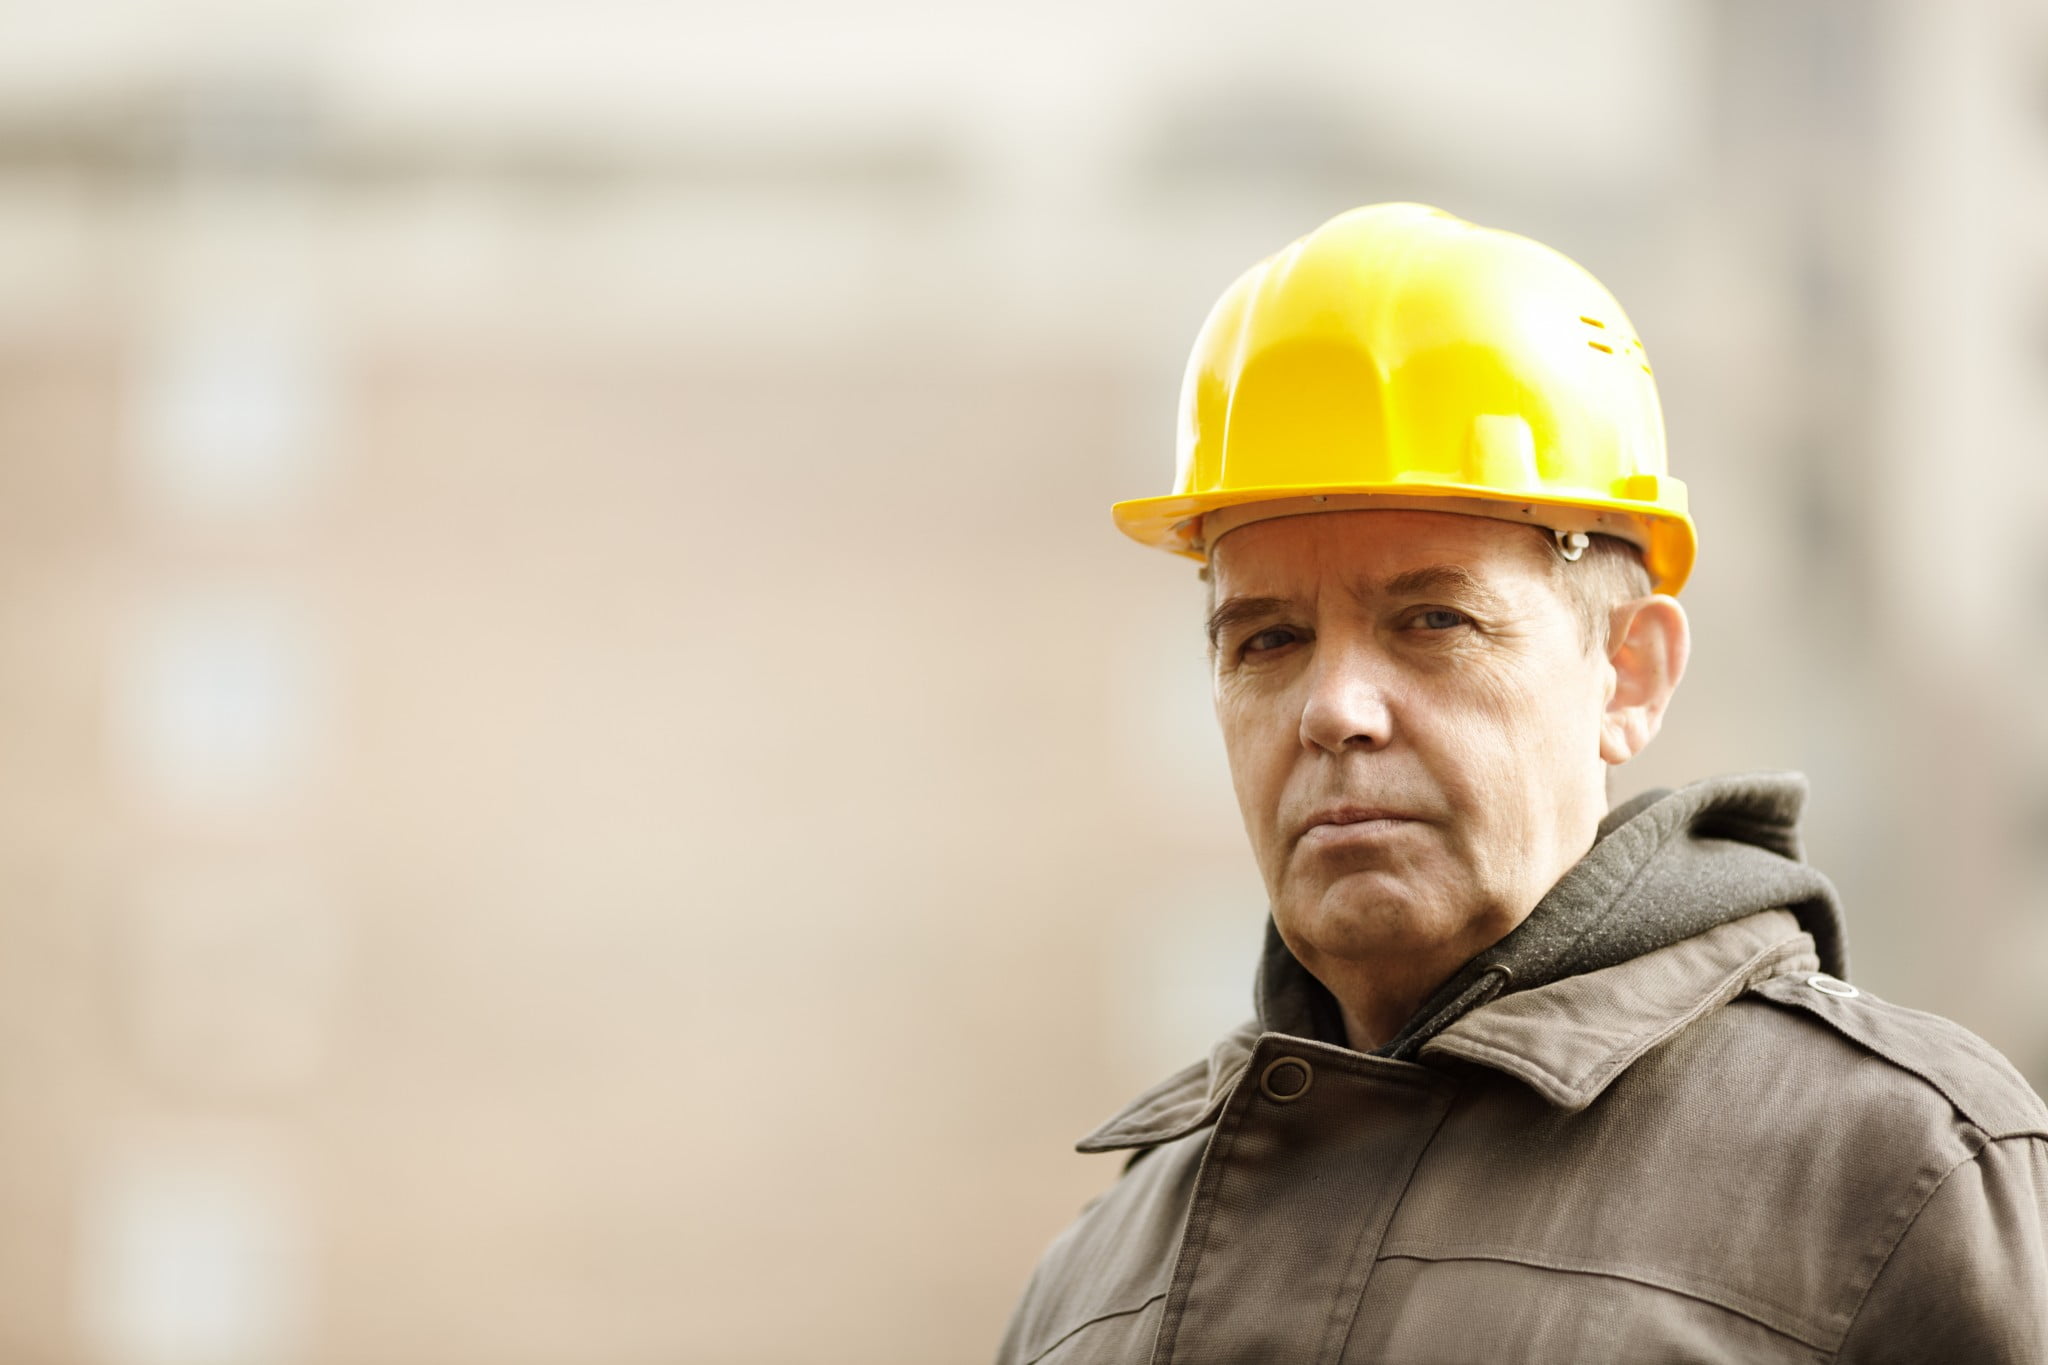 FIFO workers doubled risk of depression: older man in yellow hard hat looking wistful